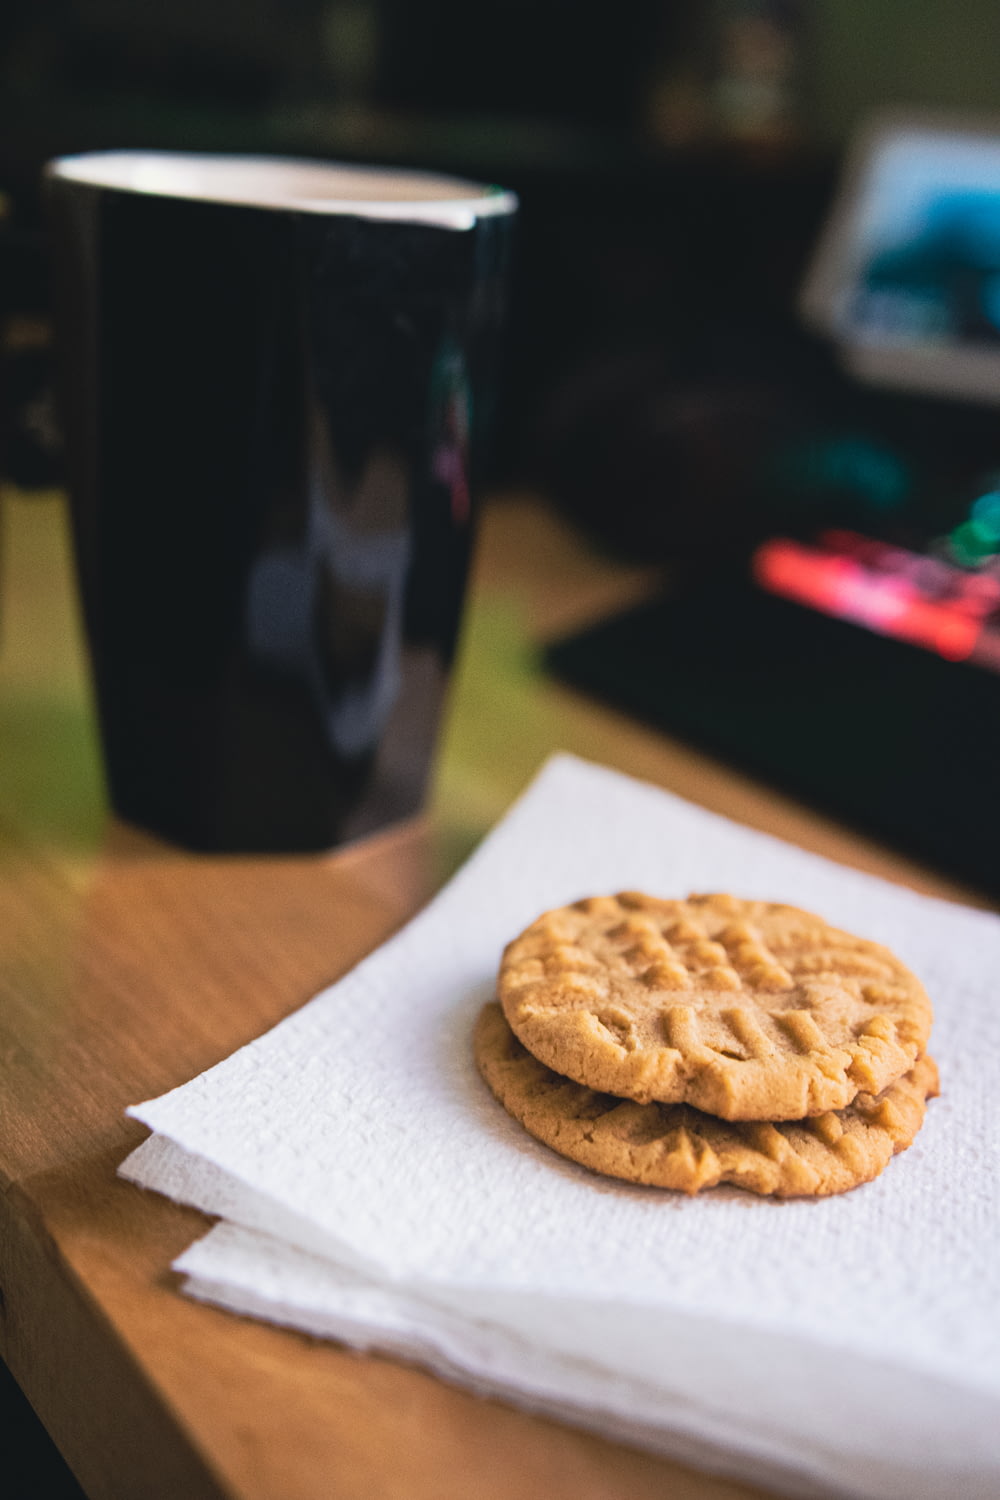 a cookie on a napkin next to a cup of coffee